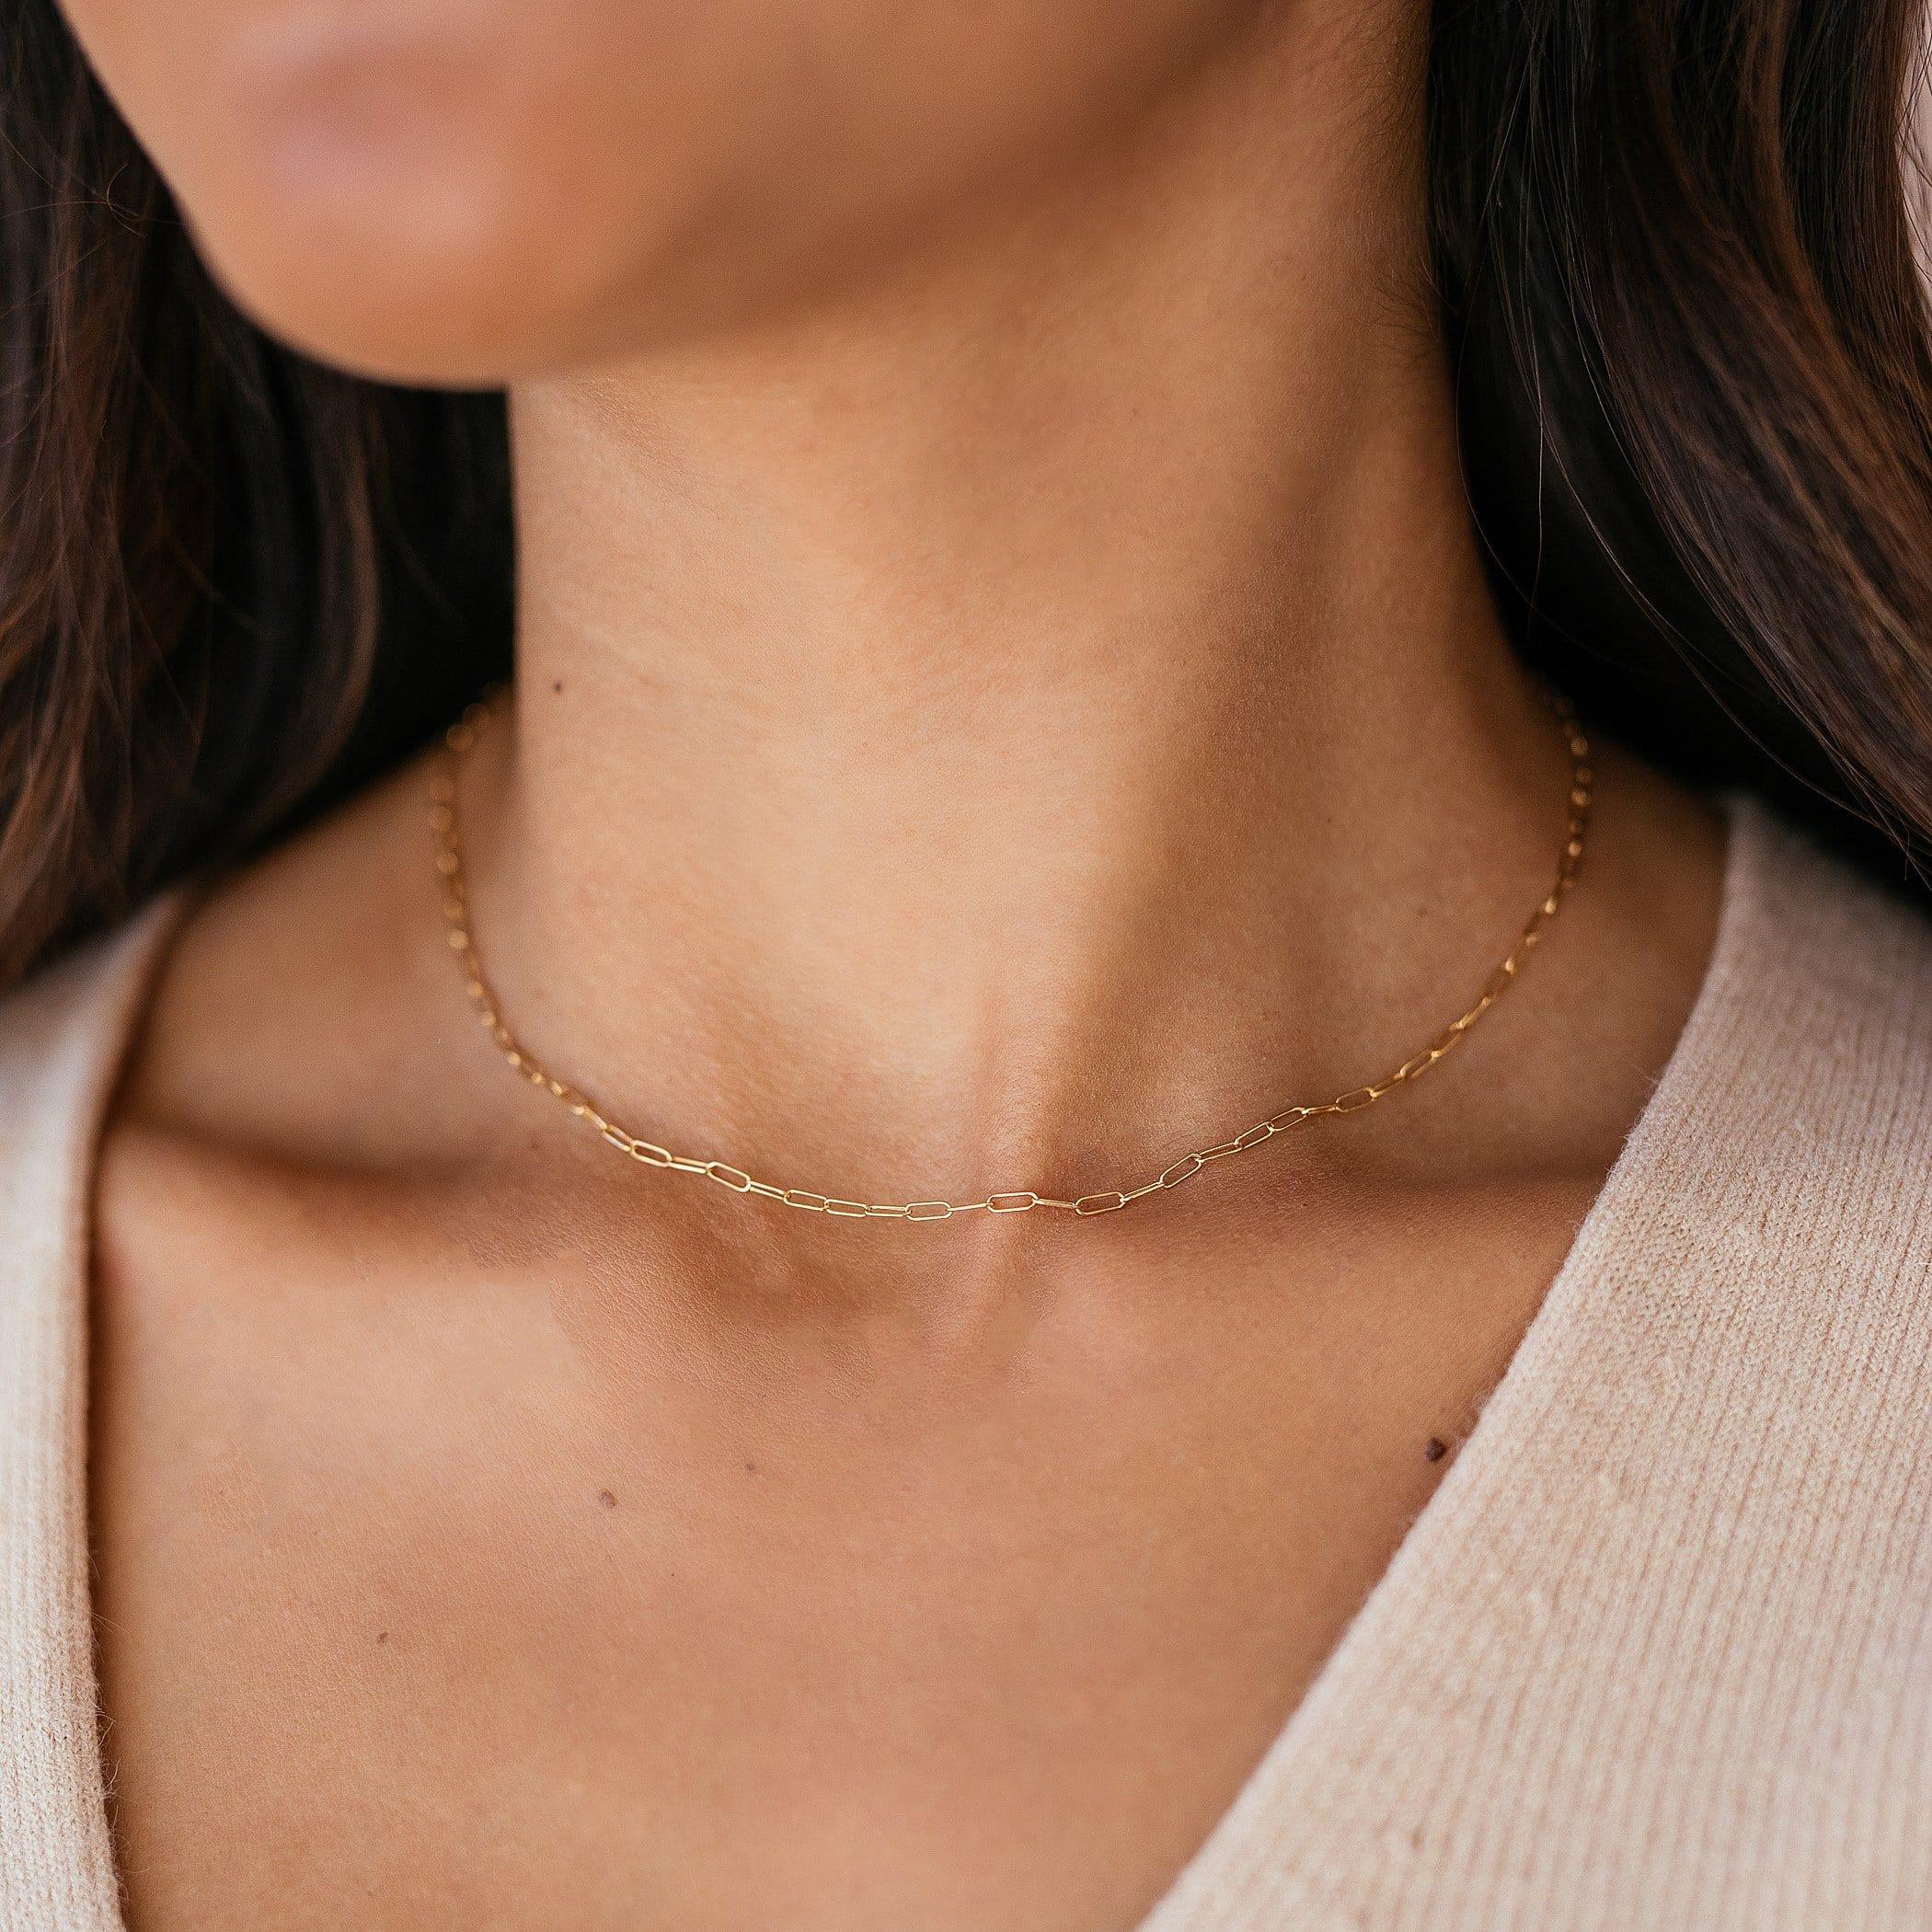 Modern Chain Necklace - Nolia Jewelry - Meaningful + Sustainably Handcrafted Jewelry